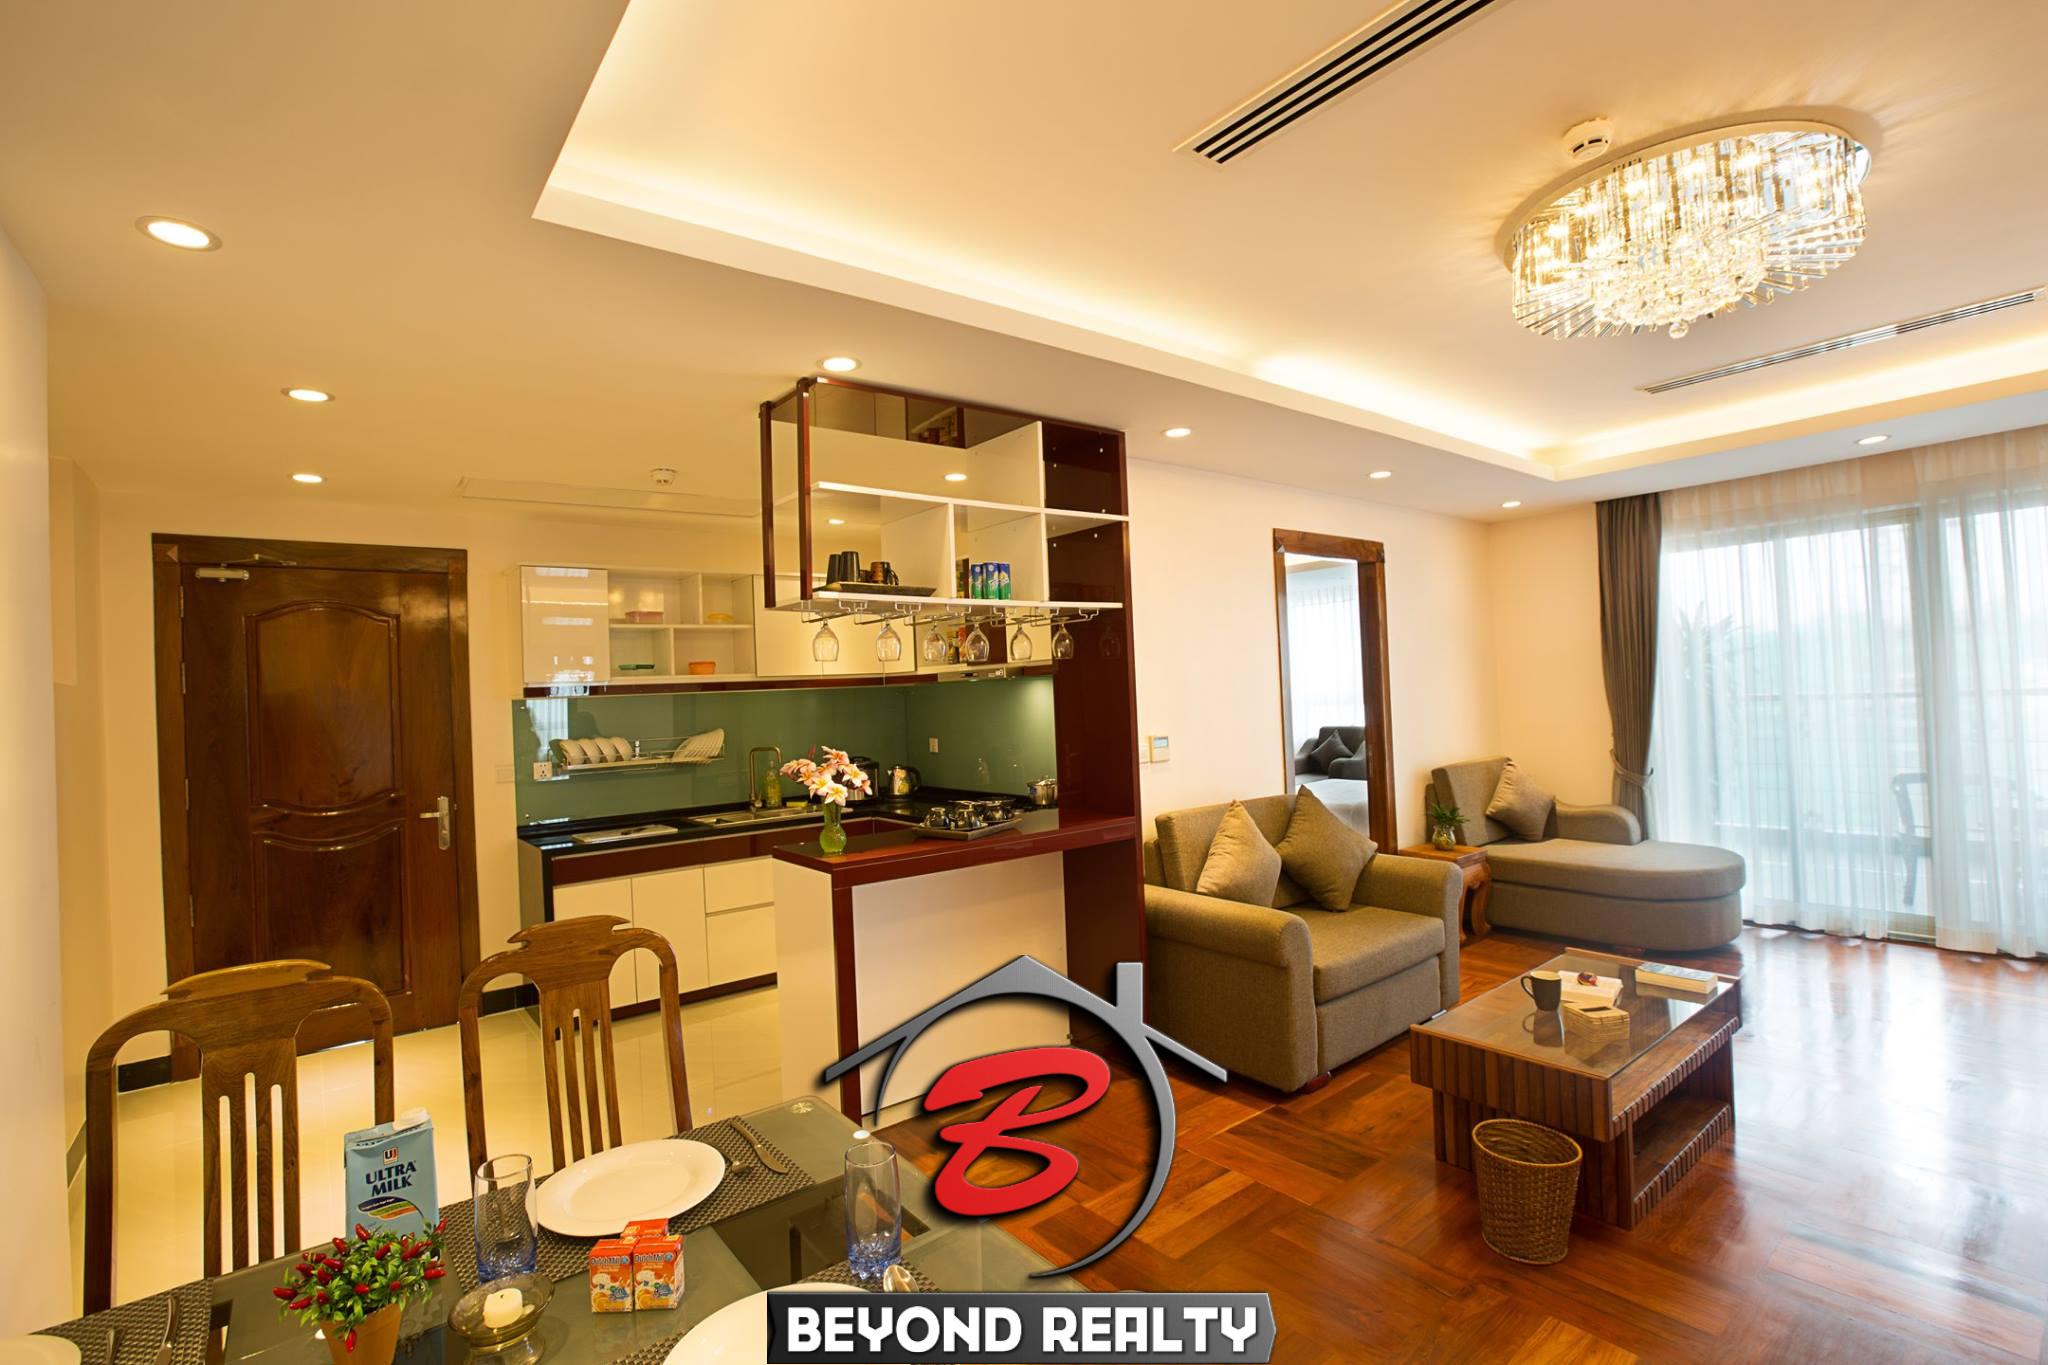 the kitchen and the living room of the luxury penthouse for rent in BKK1 Phnom Penh Cambodia